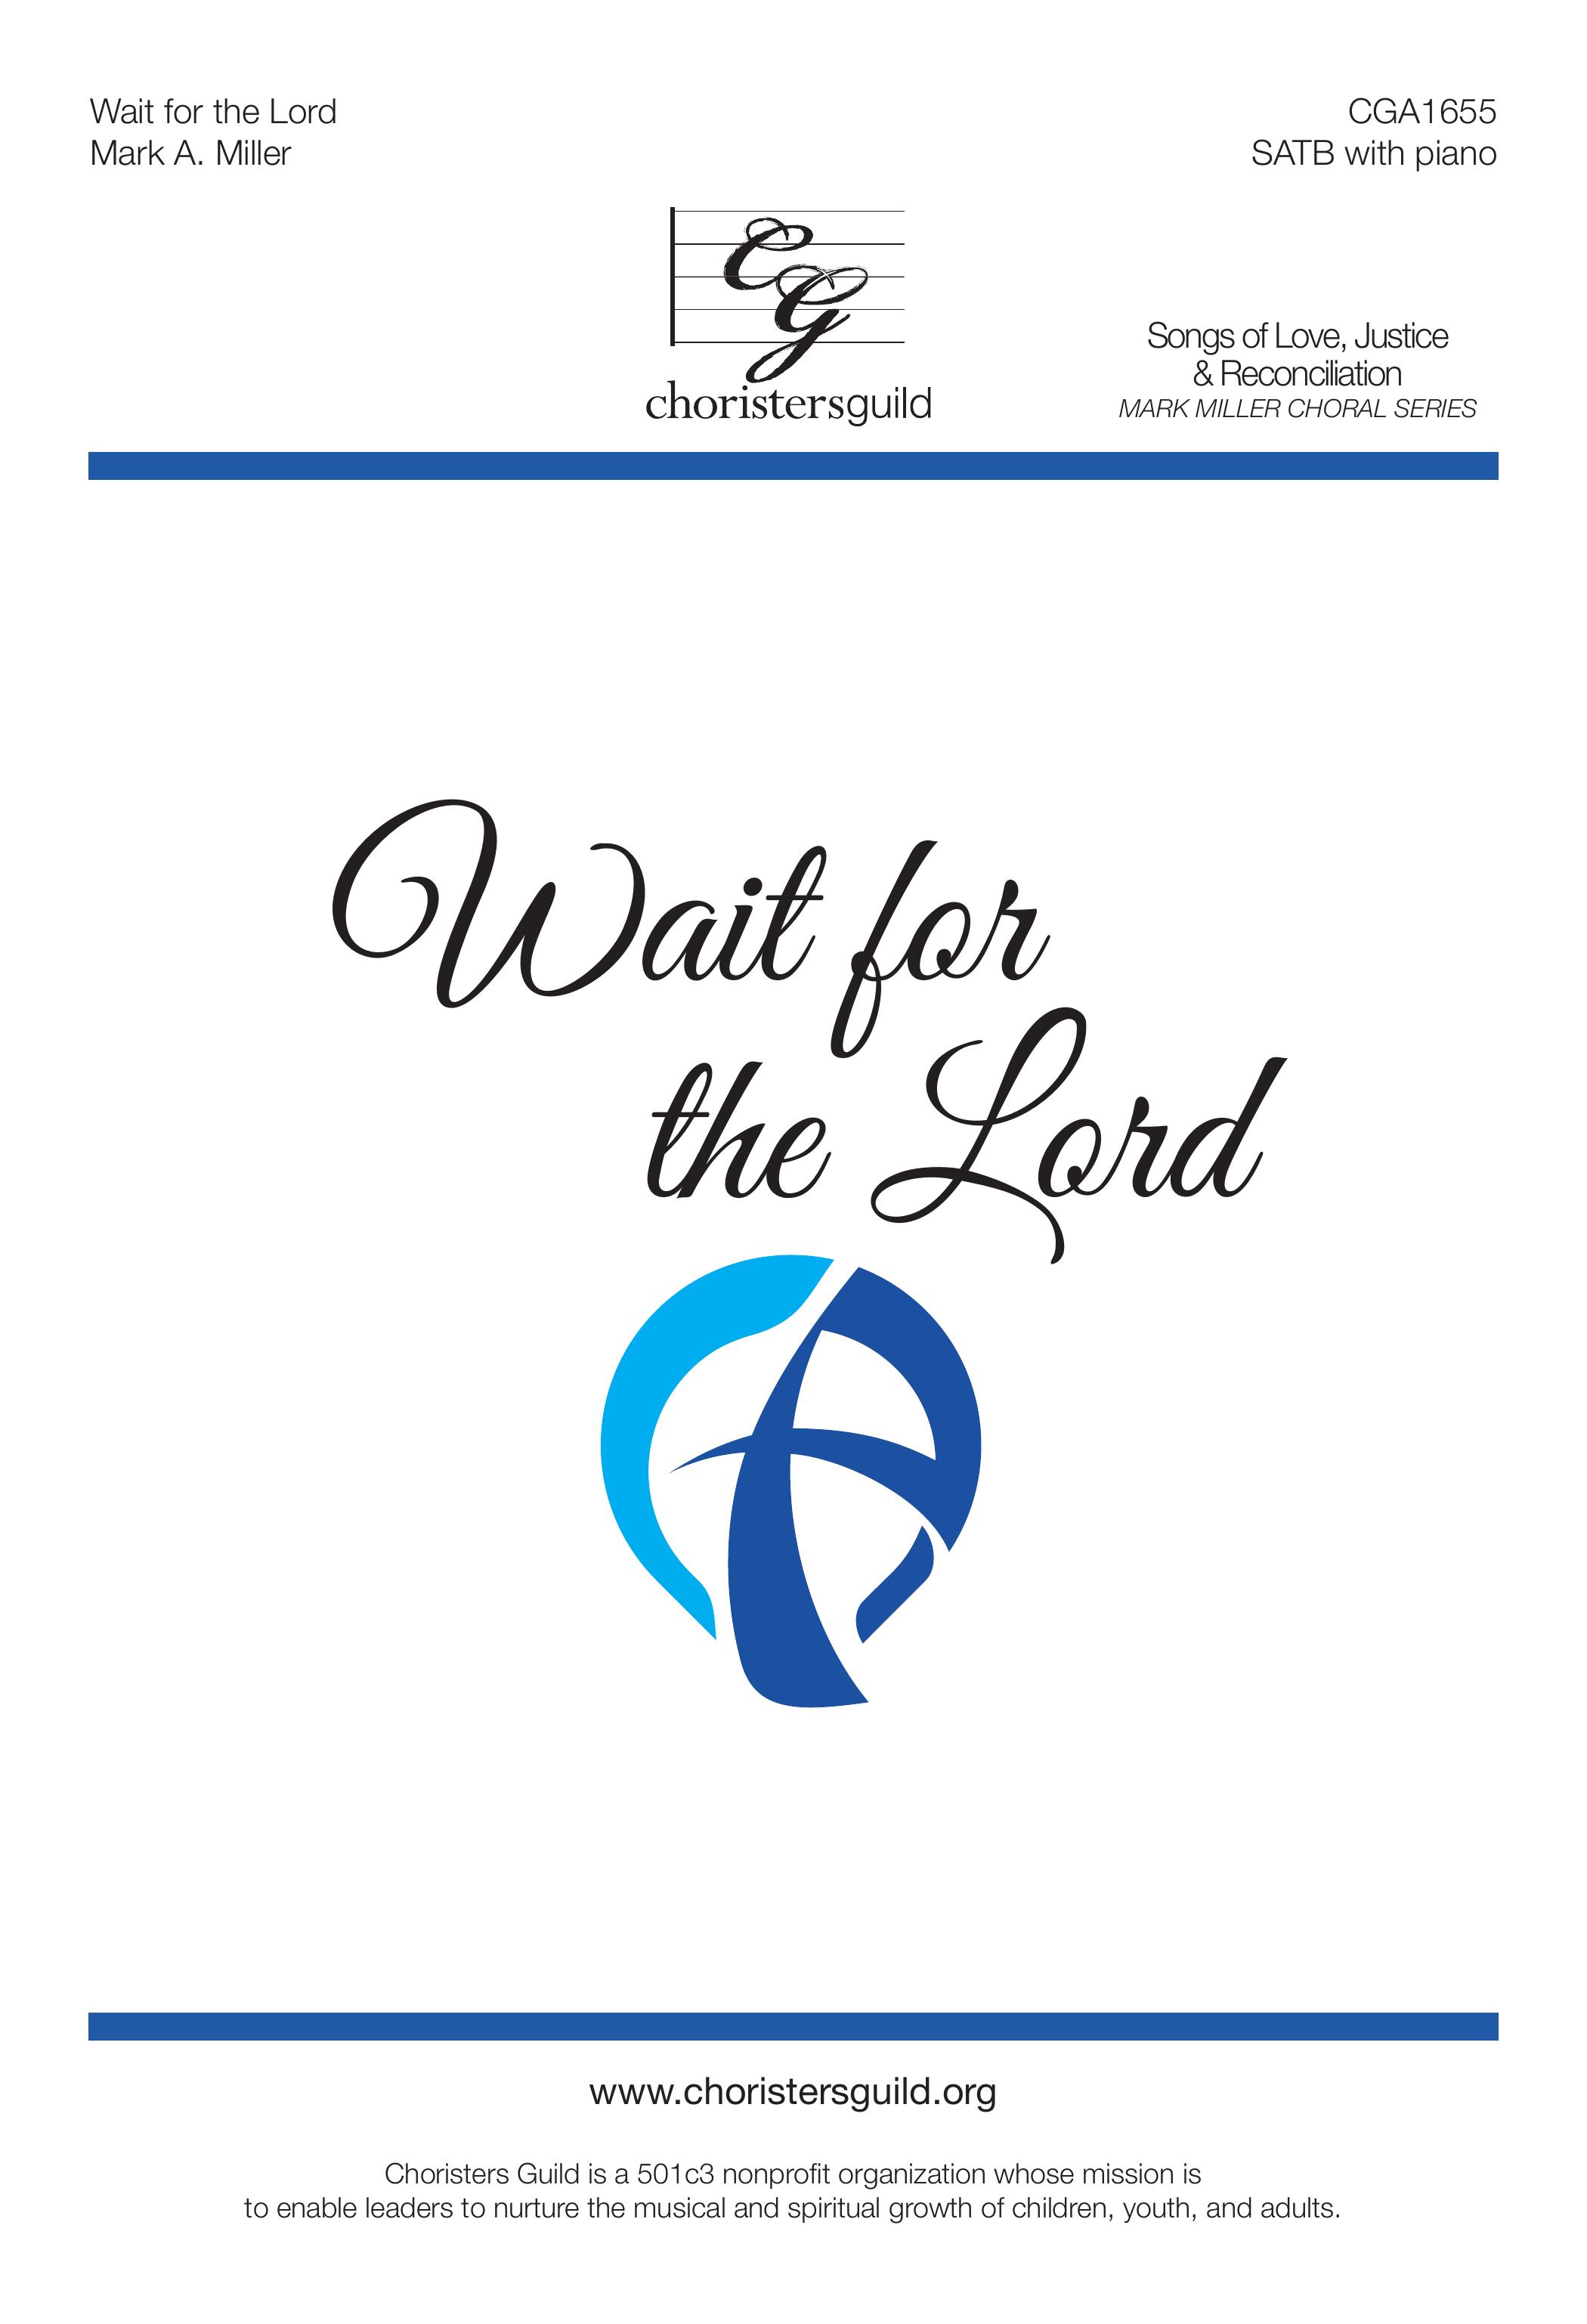 Wait for the Lord - SATB